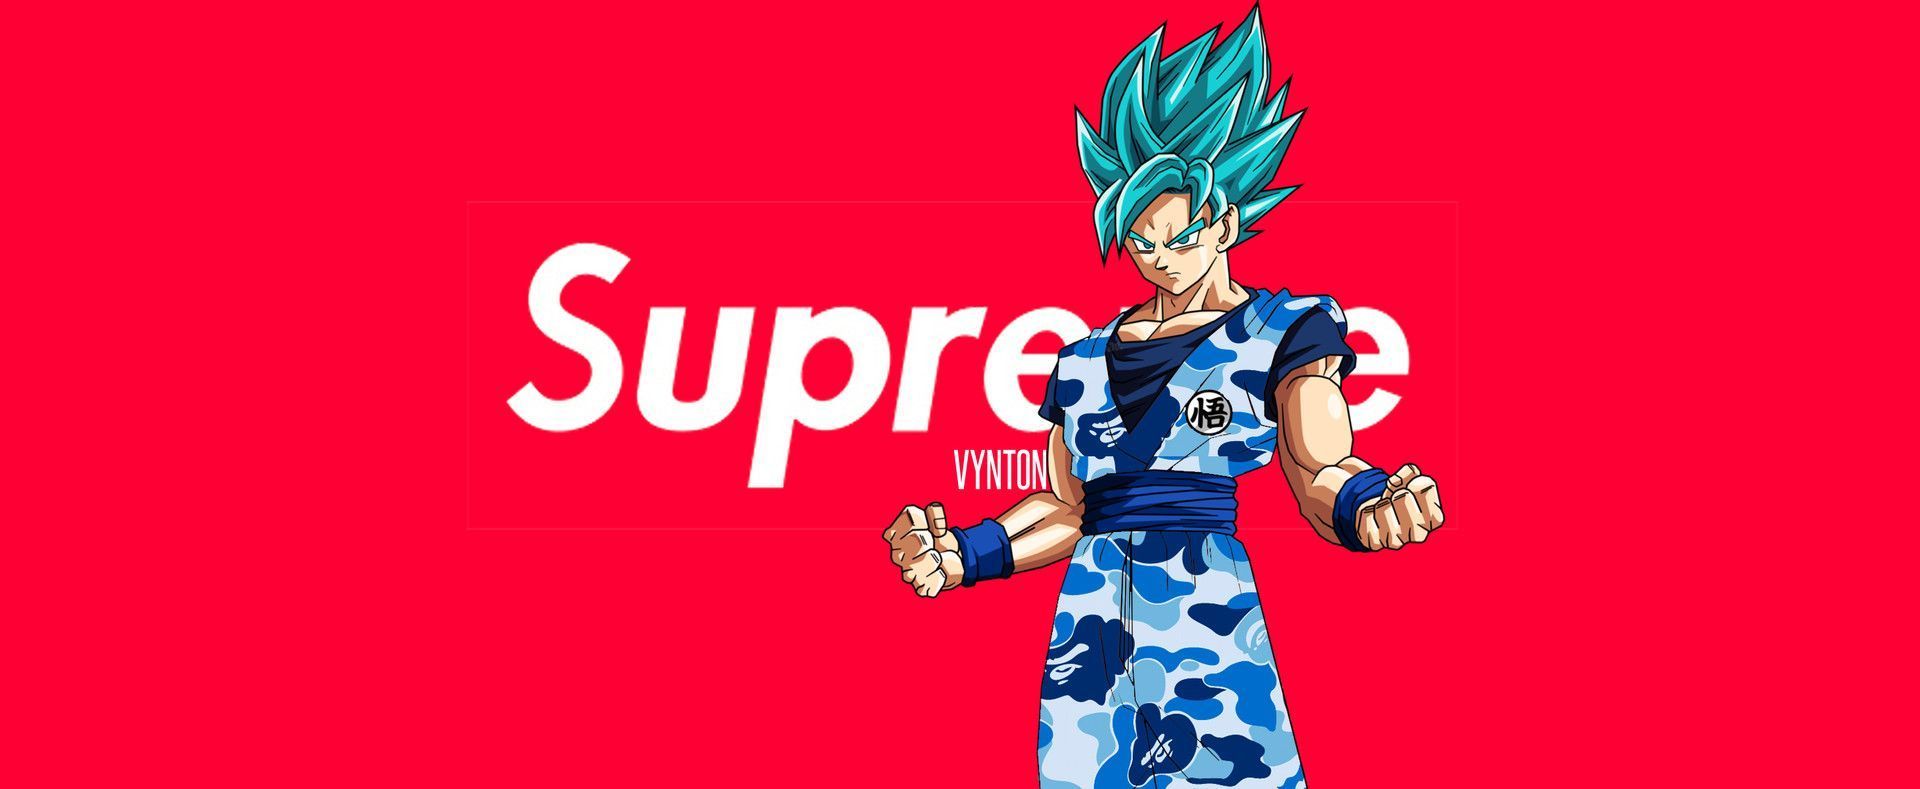 Goku Gucci Wallpapers On Wallpaperdog Tons of awesome drippy goku wallpapers to download for free. goku gucci wallpapers on wallpaperdog